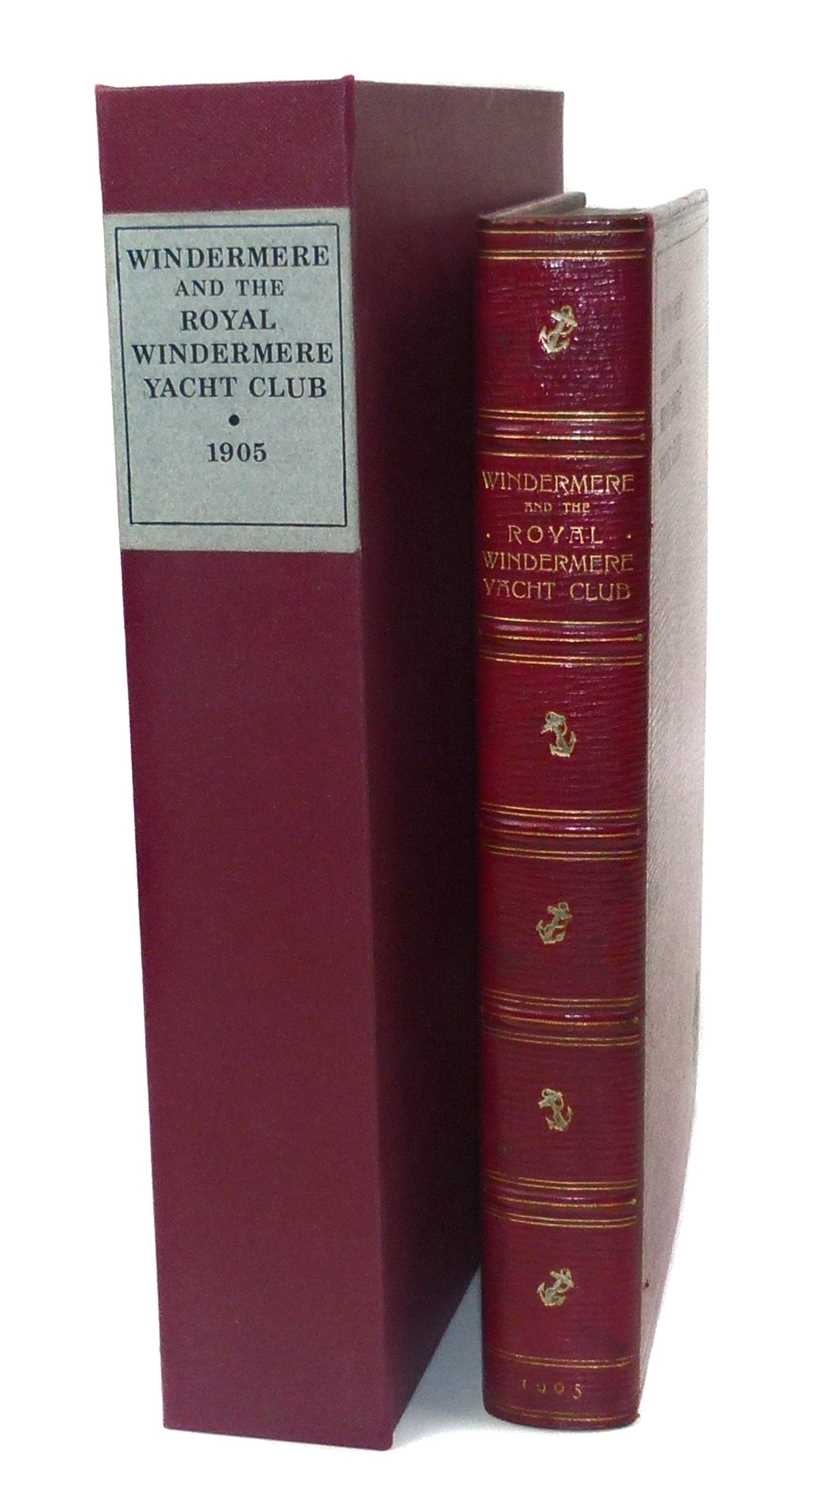 Lot 106 - Forwood Sir W.B. Windermere And The Royal Windermere Yacht Club